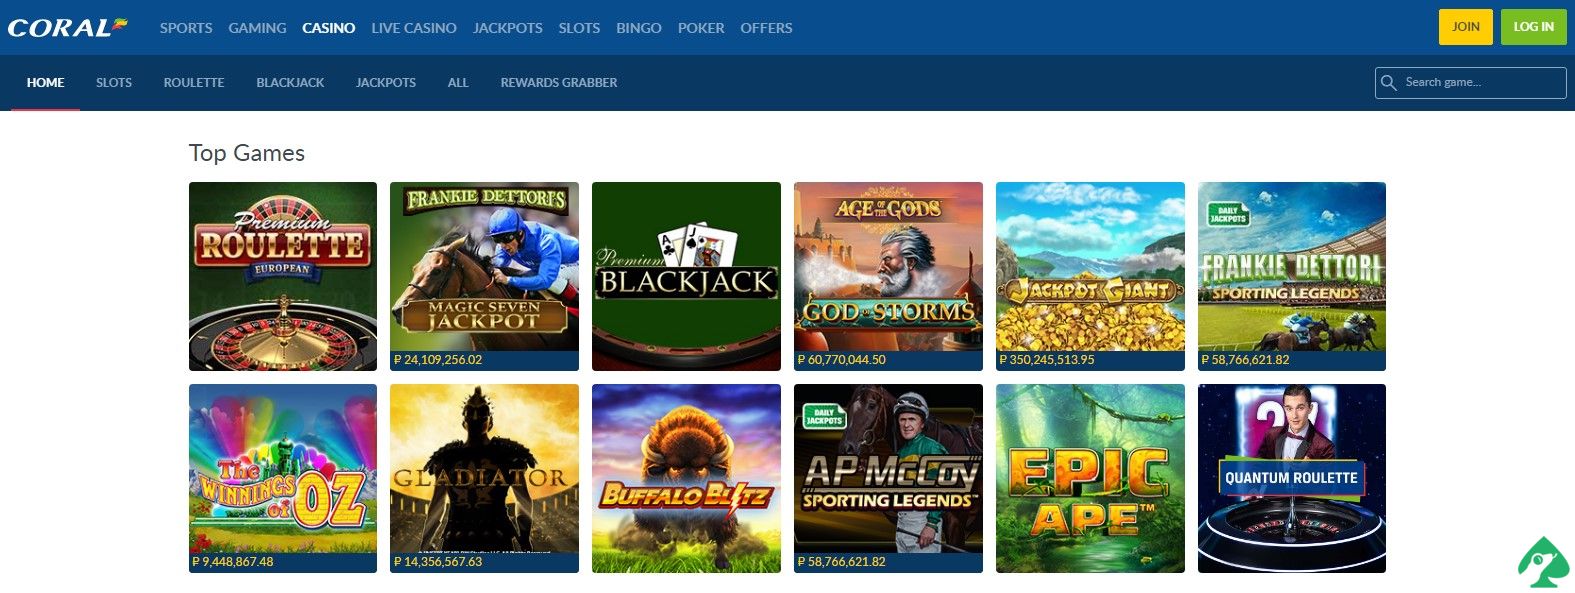 Coral Online Casino UK promotions and codes